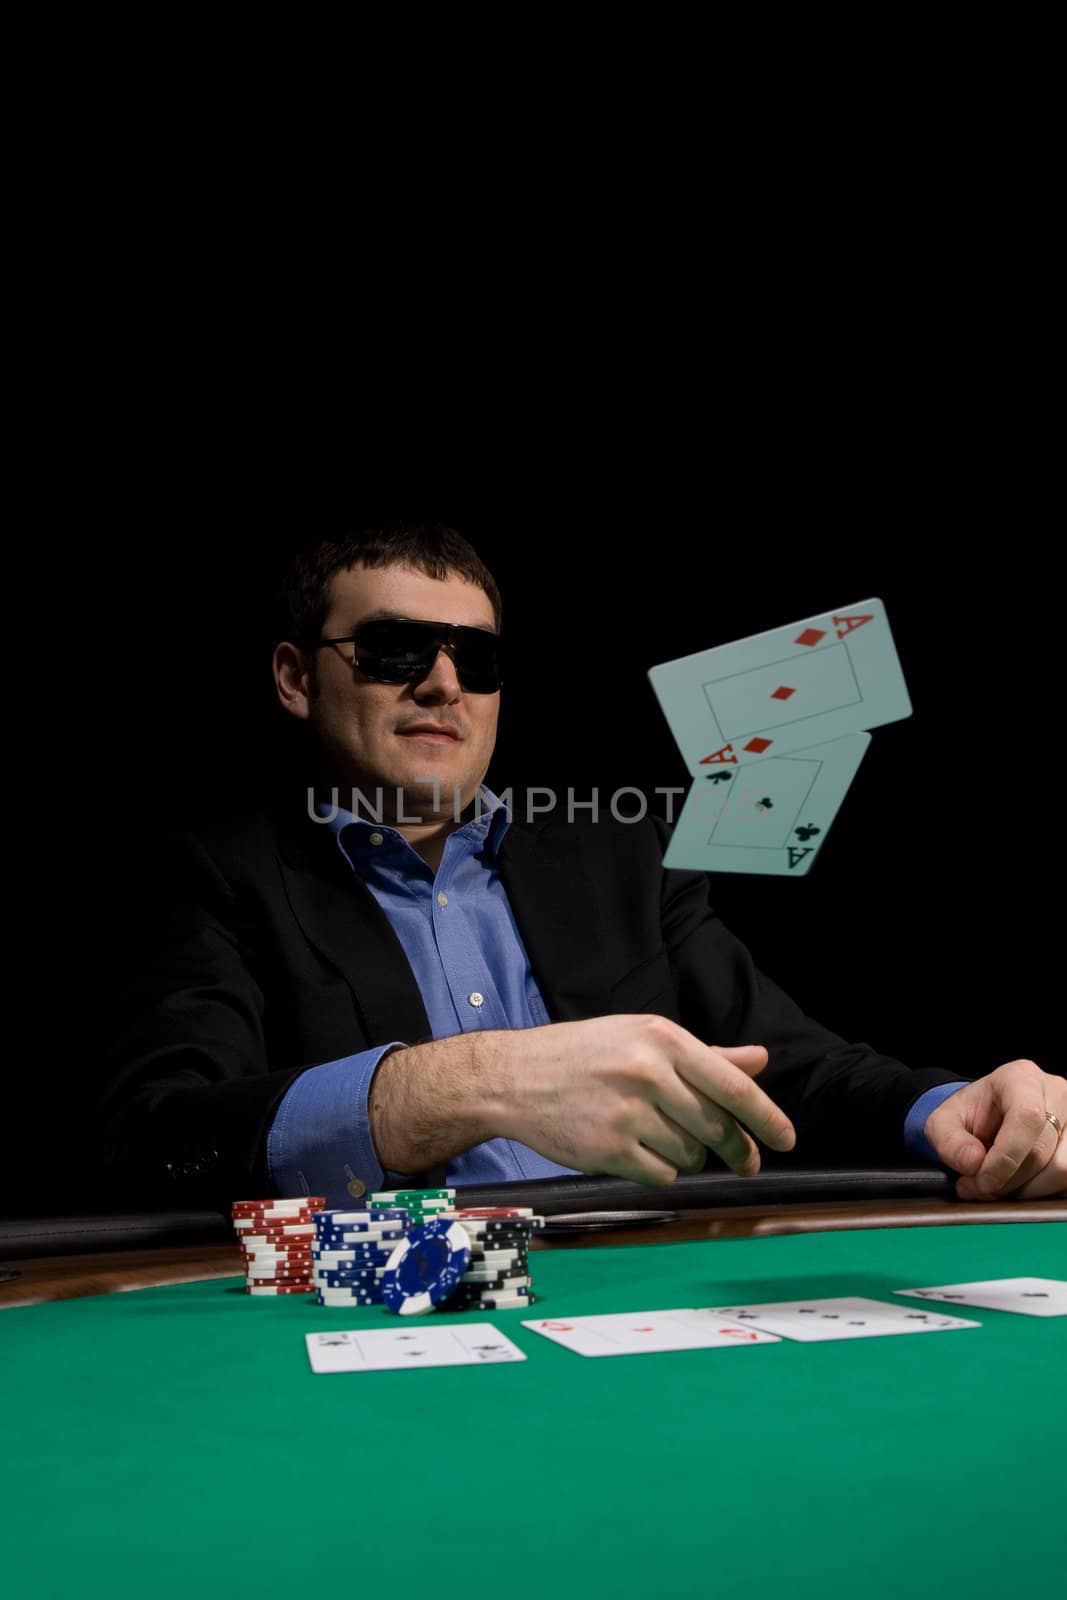 Flying cards in texas hold'em poker over green casino table